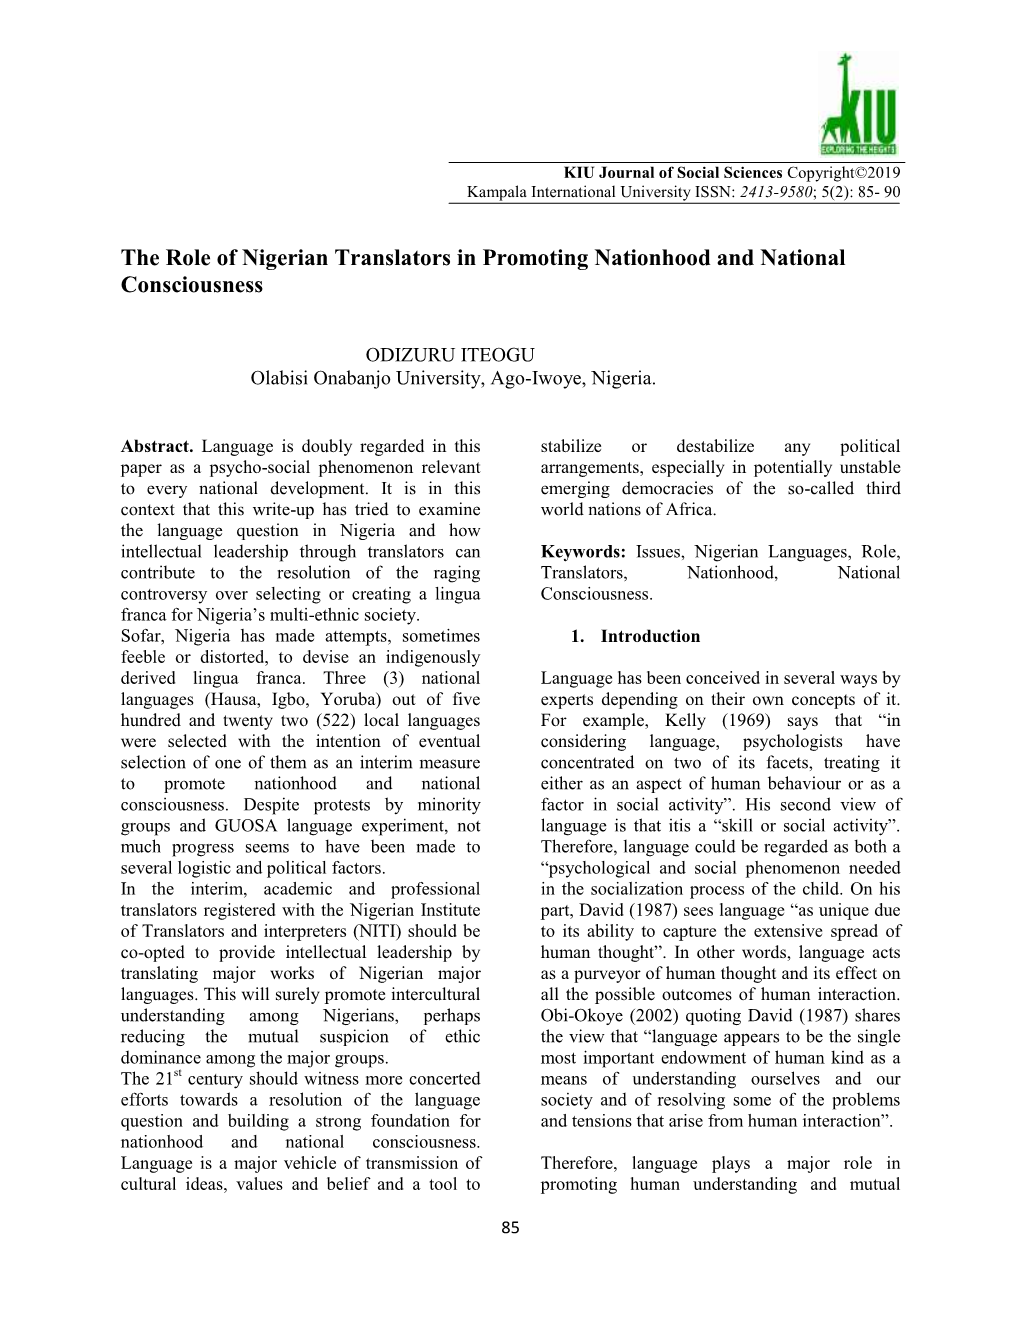 The Role of Nigerian Translators in Promoting Nationhood and National Consciousness